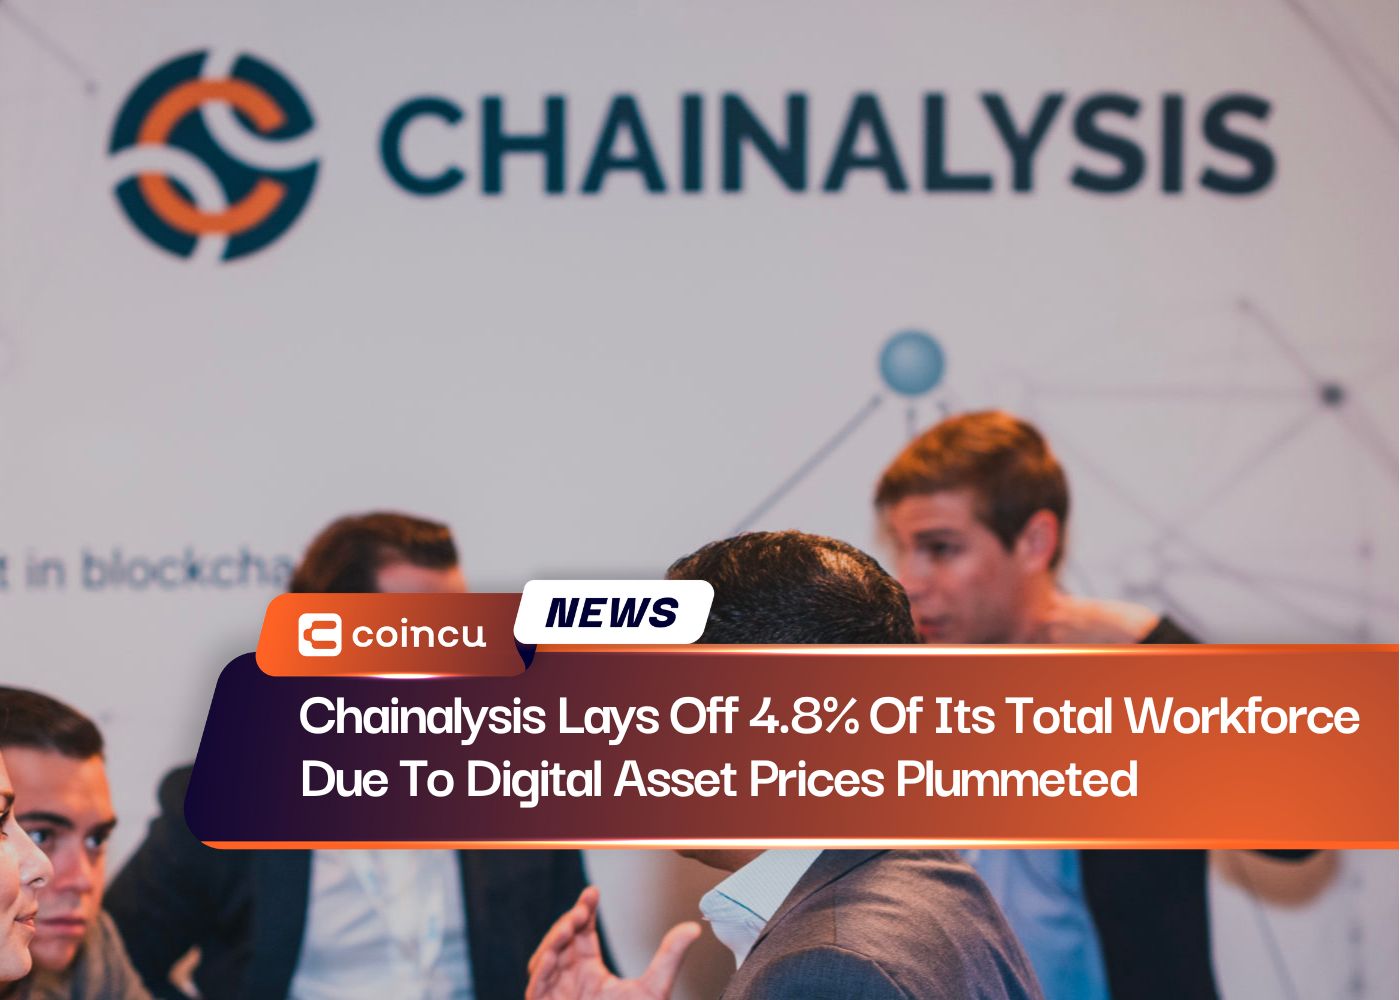 Chainalysis Lays Off 4.8% Of Its Total Workforce Due To Digital Asset Prices Plummeted